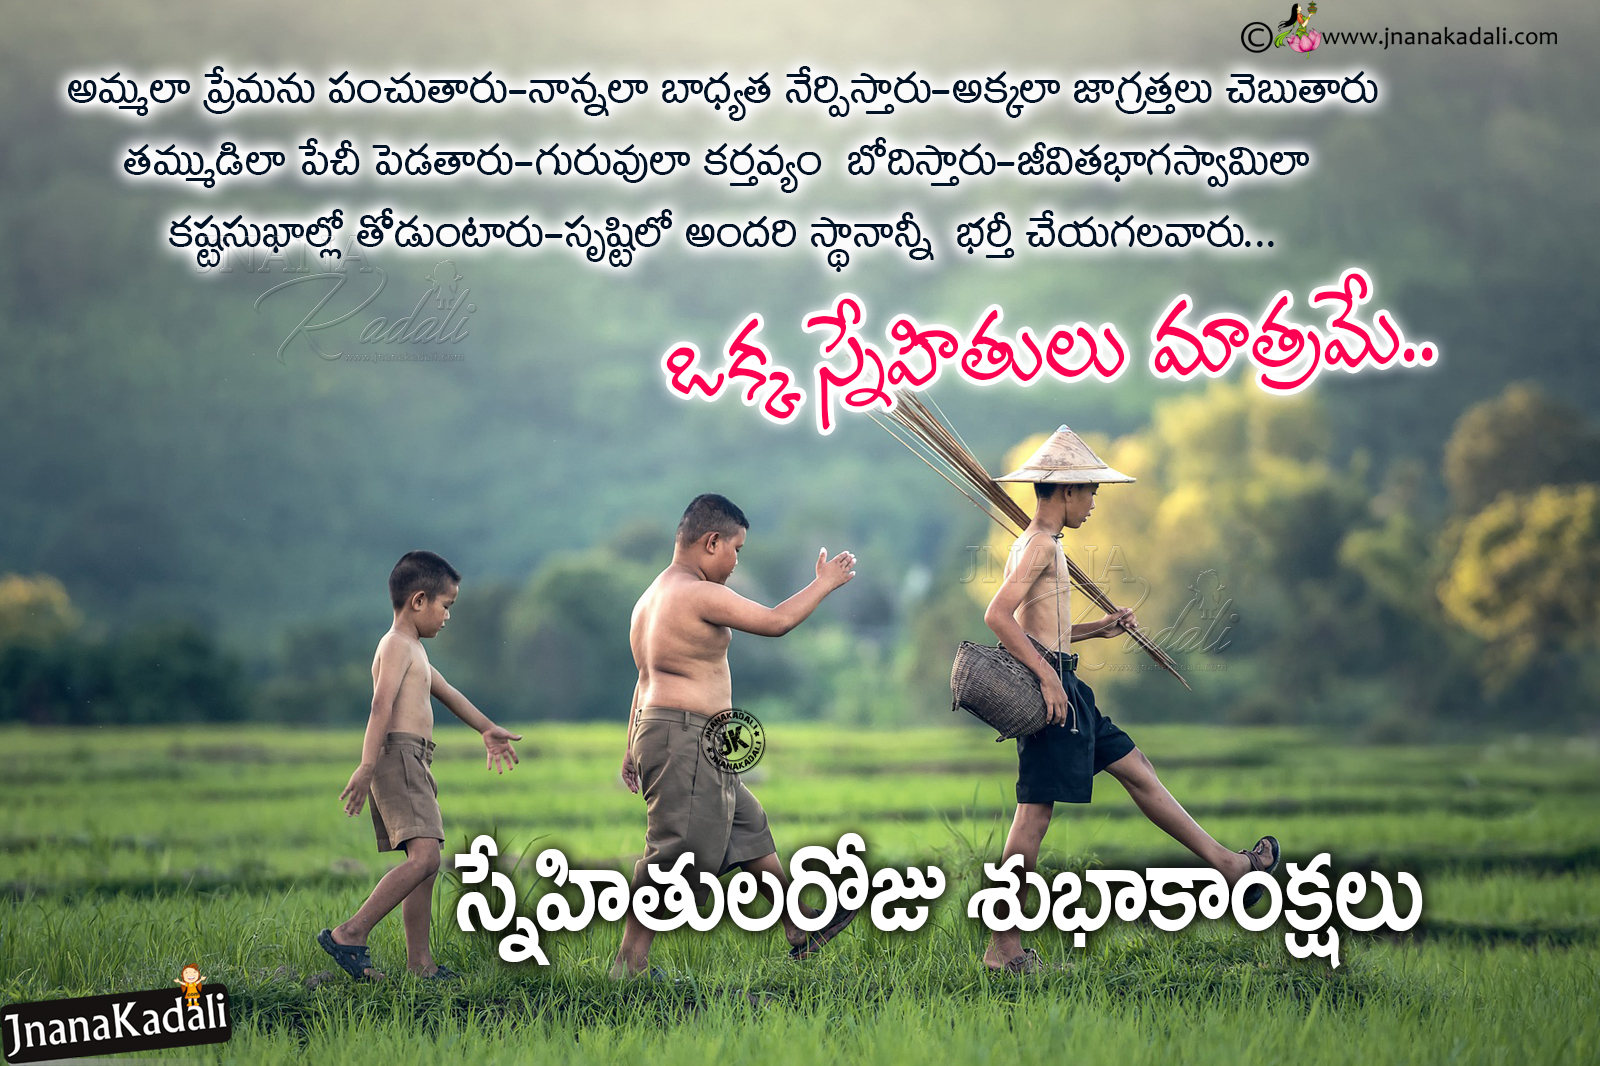 Friendship Day Quotes In Telugu, Friendship Hd Wallpapers - Summer In Laos - HD Wallpaper 